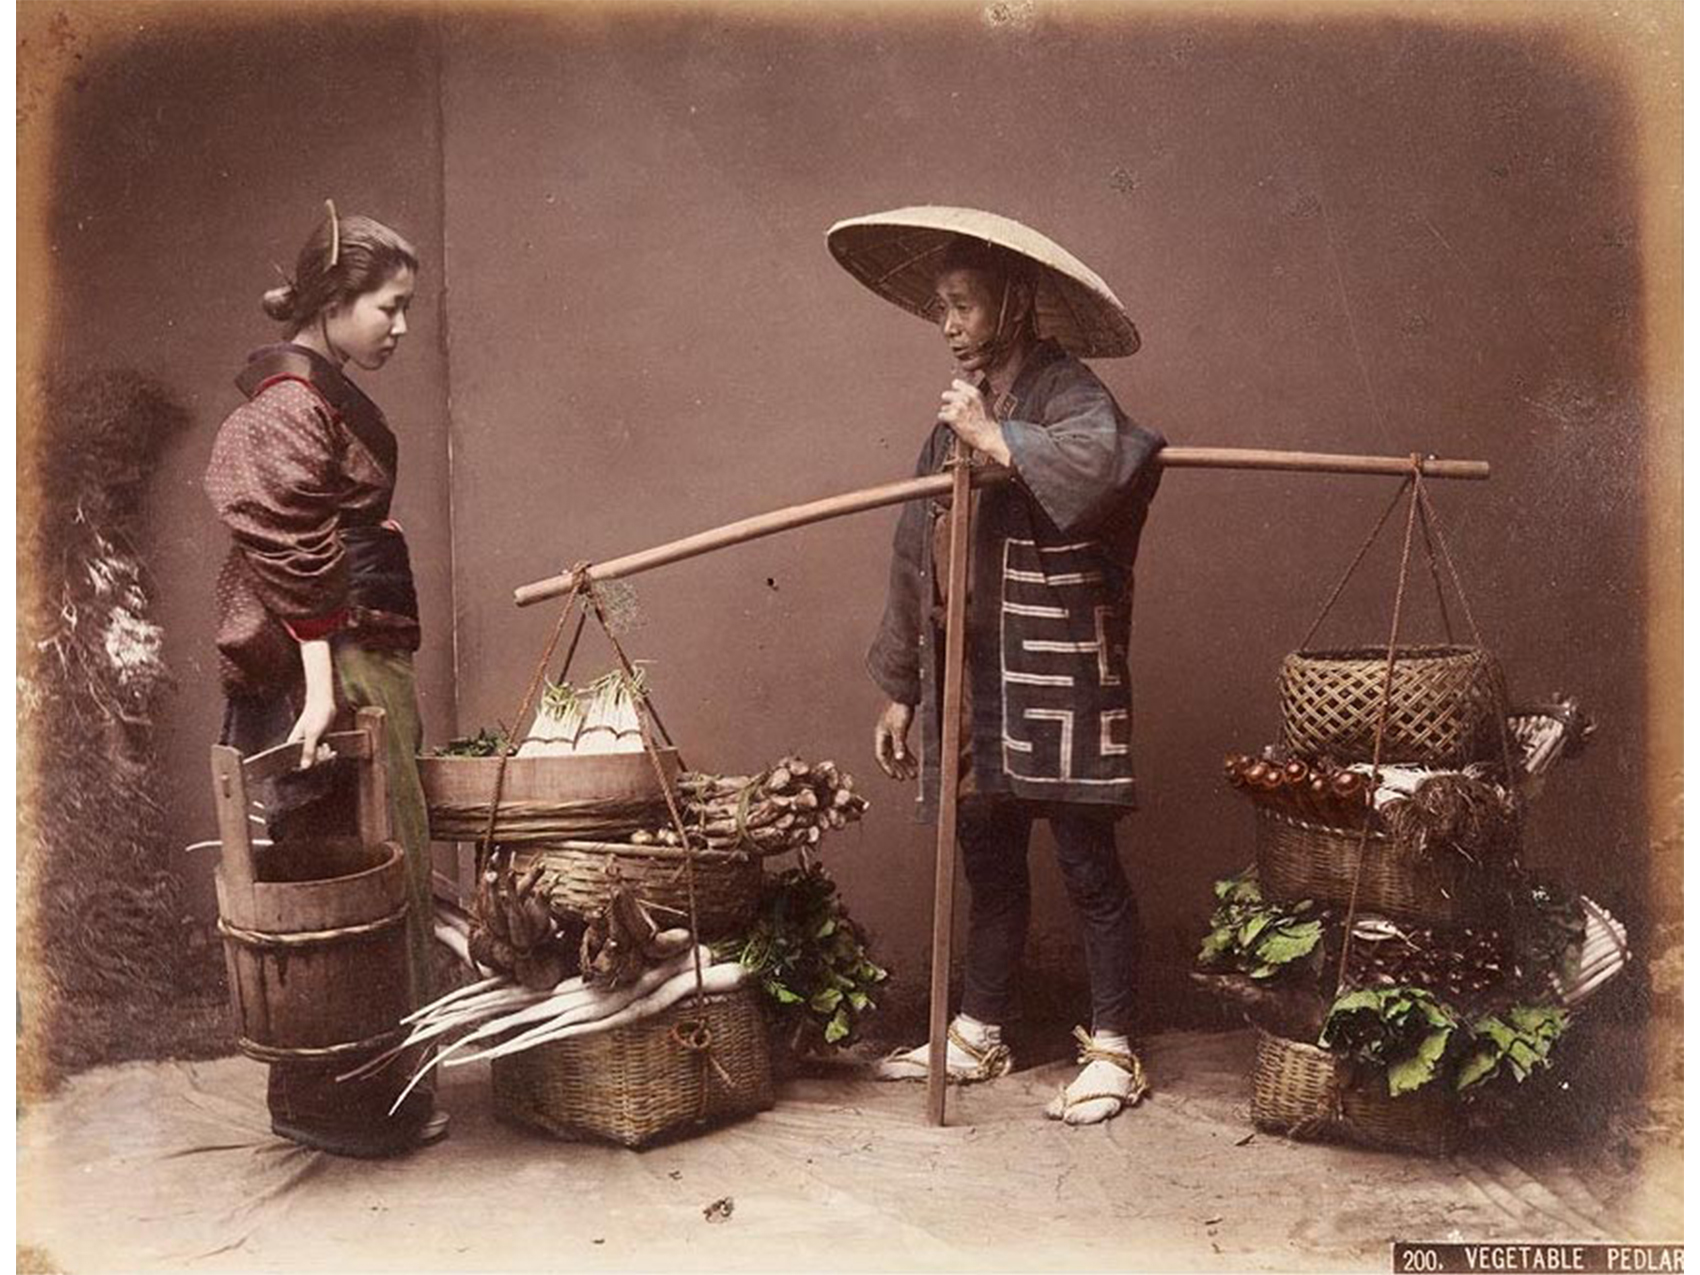 interior, two figures standing, at left a young woman holding a water bucket, at right a man with coat and large hat holding a pole from which hang two stacks of three baskets at each end, filled with vegetables